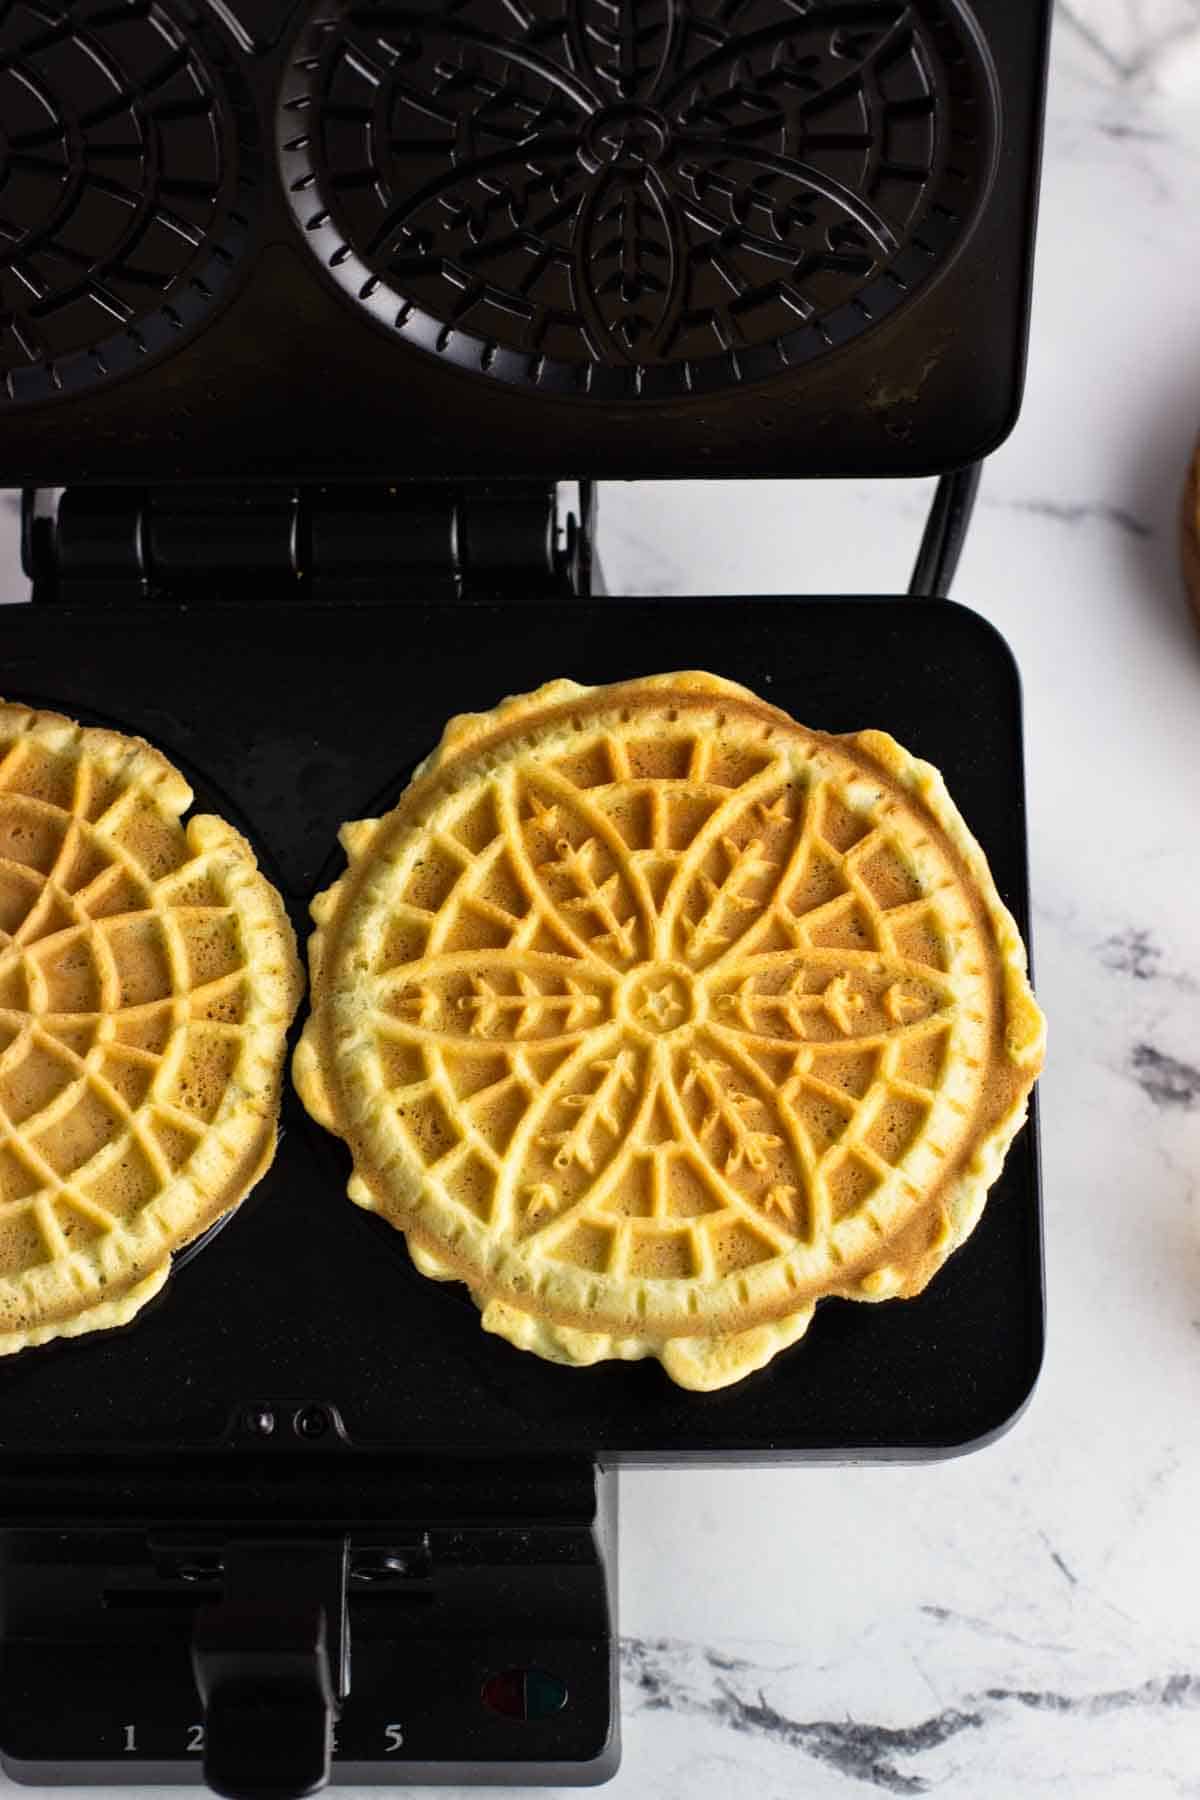 Cooked pizzelle on the pizzelle iron.